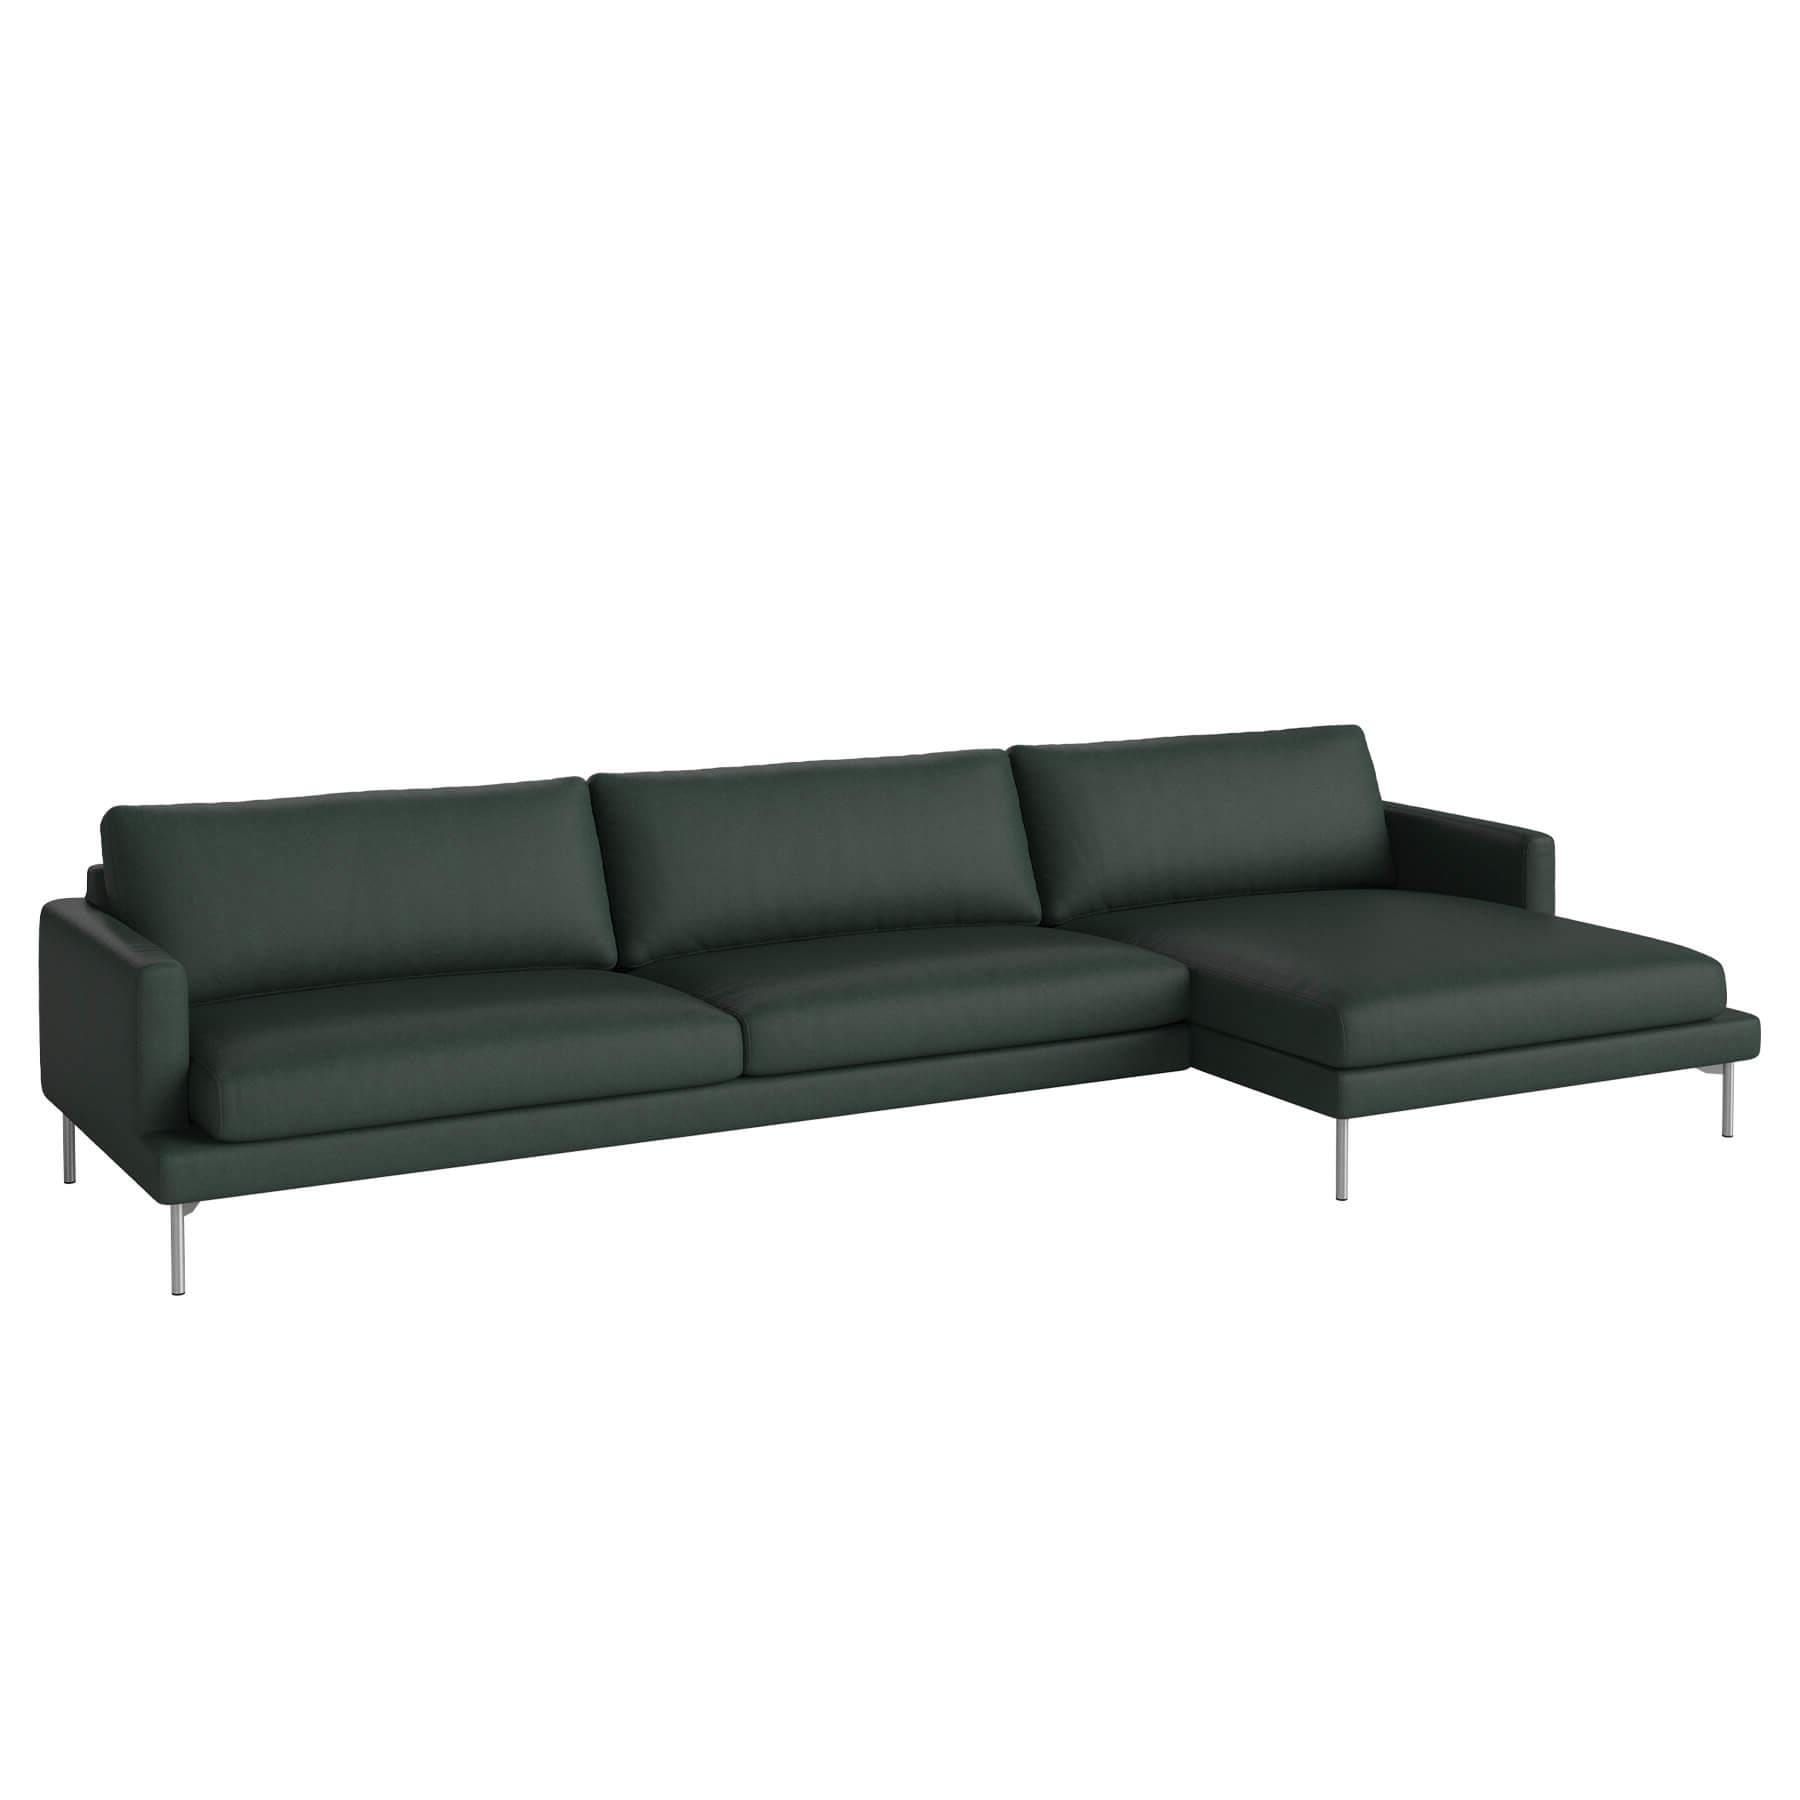 Bolia Veneda Sofa 45 Seater Sofa With Chaise Longue Brushed Steel Gaja Dark Green Right Green Designer Furniture From Holloways Of Ludlow